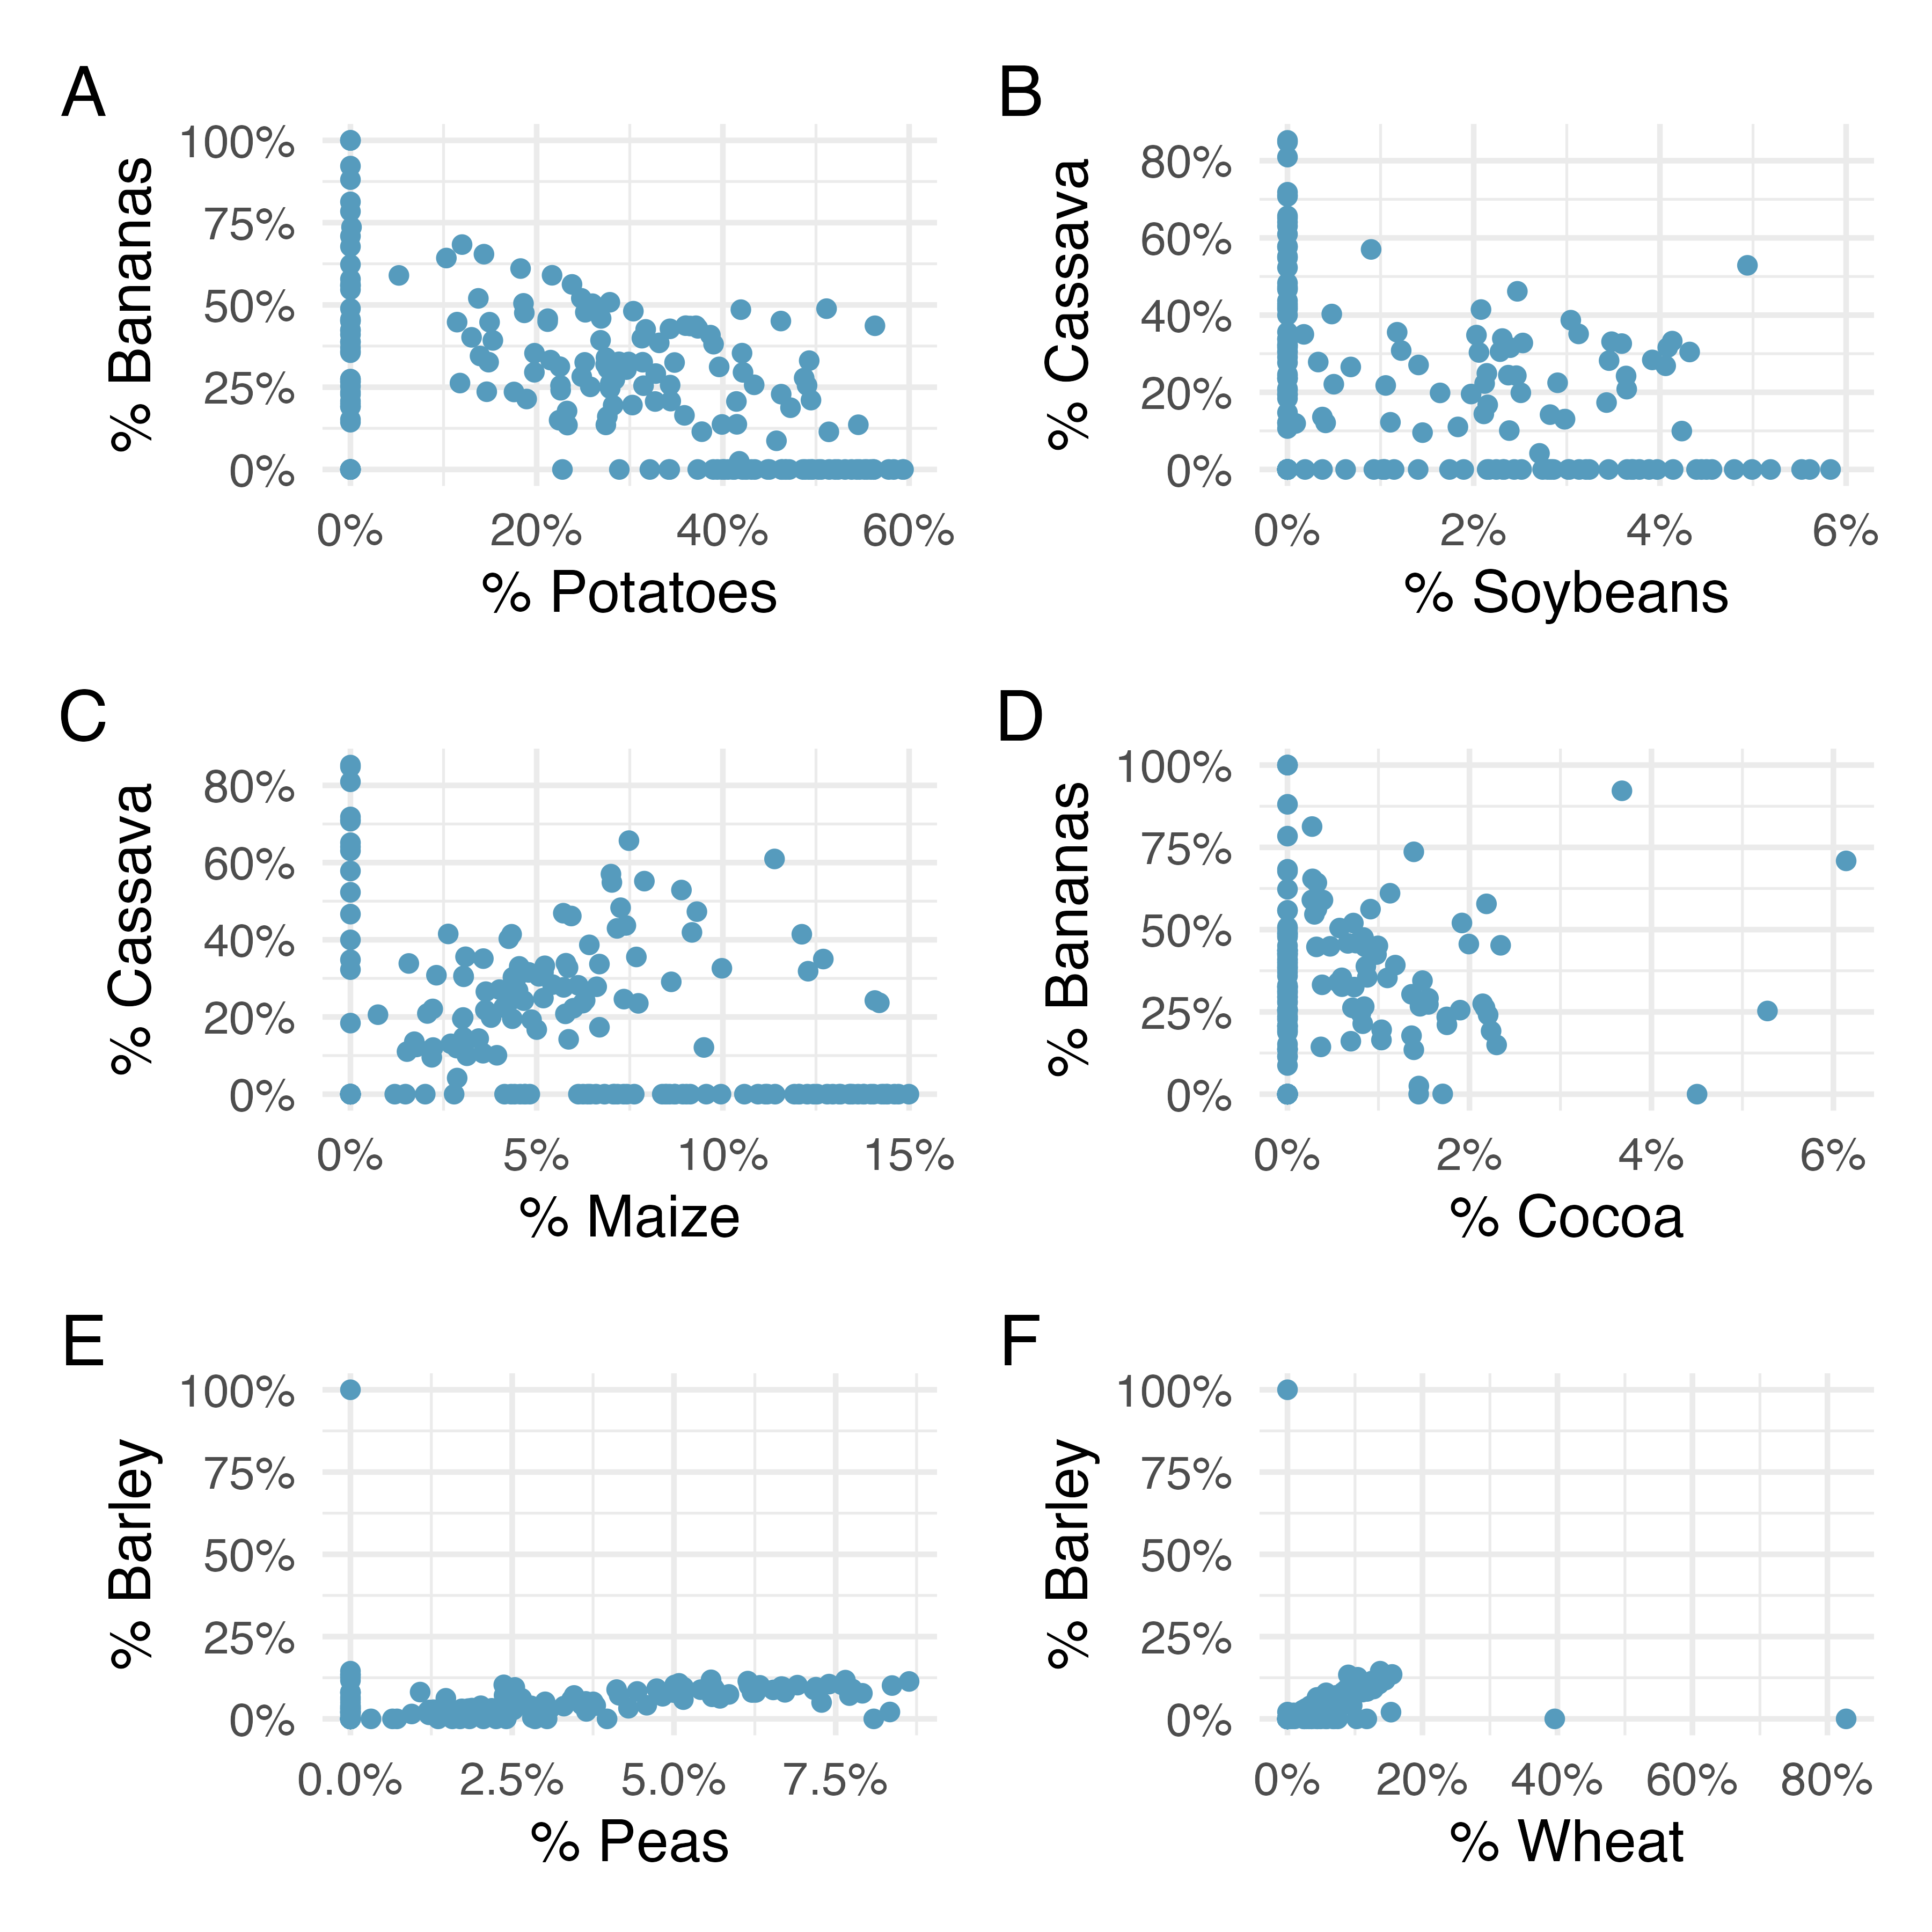 From a real dataset, we display scatterplots of the relationship between percent of crop which is each of the following -- bananas, potatoes, cassava, soybeans, maize, cocoa, barley, peas, and wheat for each country. For example, potatoes and bananas are negatively correlated and bananas and cocoa do not seem correlated at all.